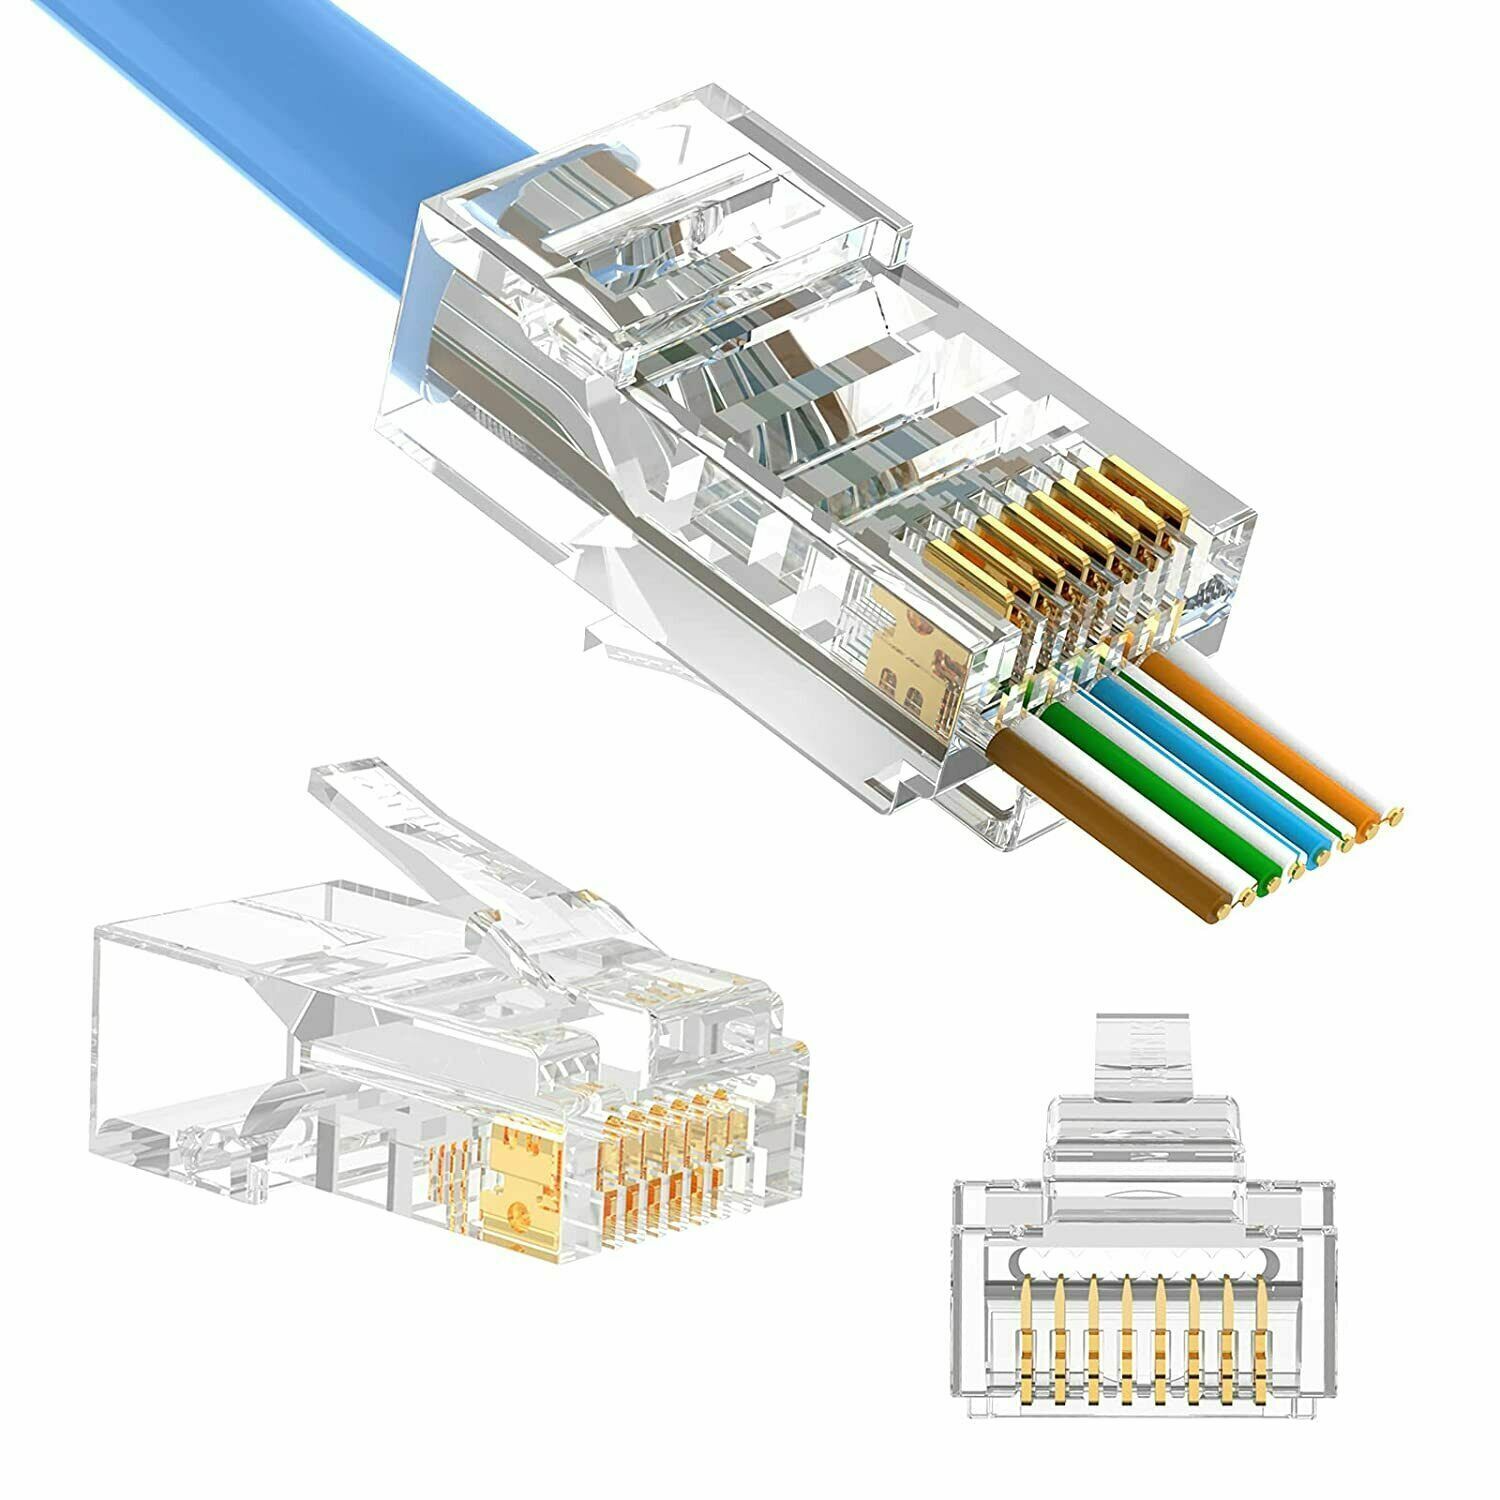 100Pc RJ45 Pass Through Modular Plug Network Cable Connector End - Click Image to Close